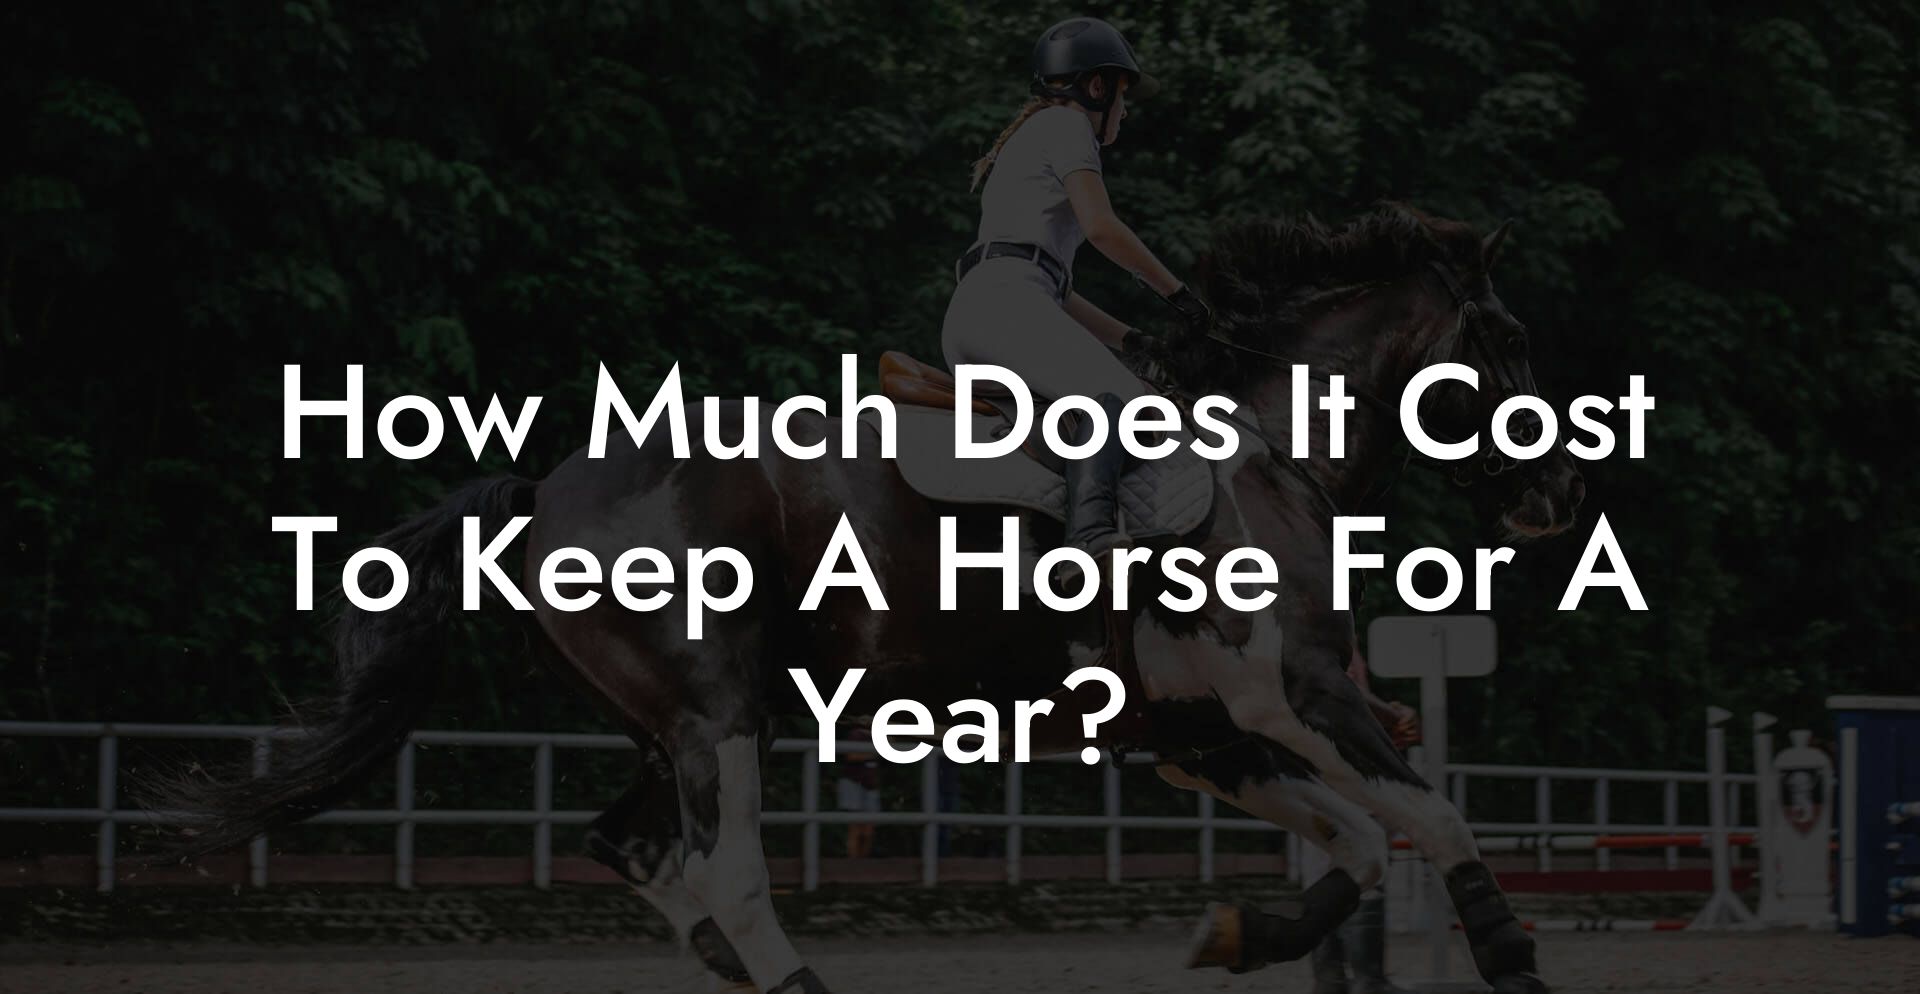 How Much Does It Cost To Keep A Horse For A Year?